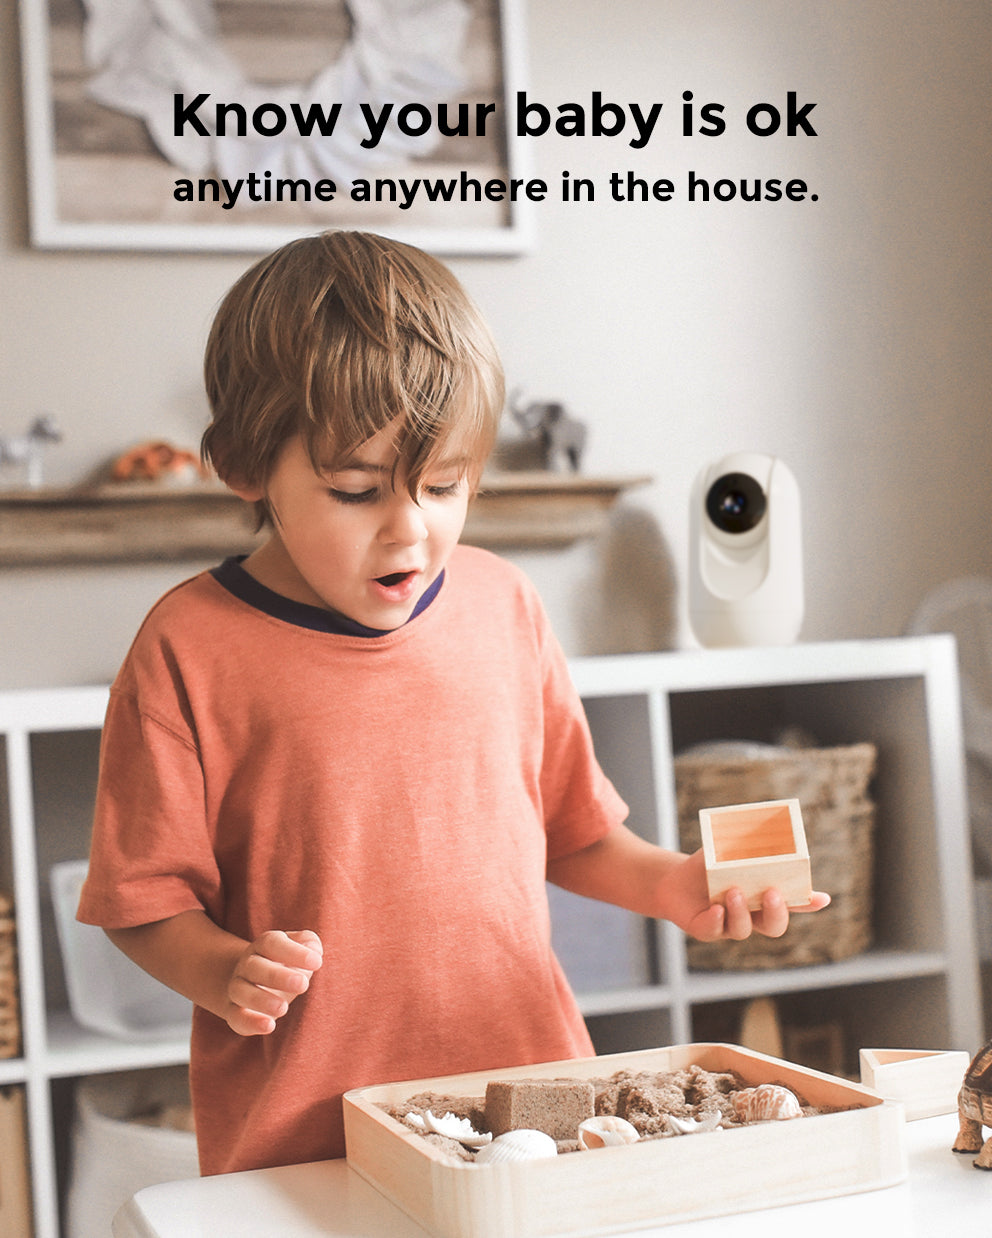 1080p Full HD Camera for Video Baby Monitor For Playing